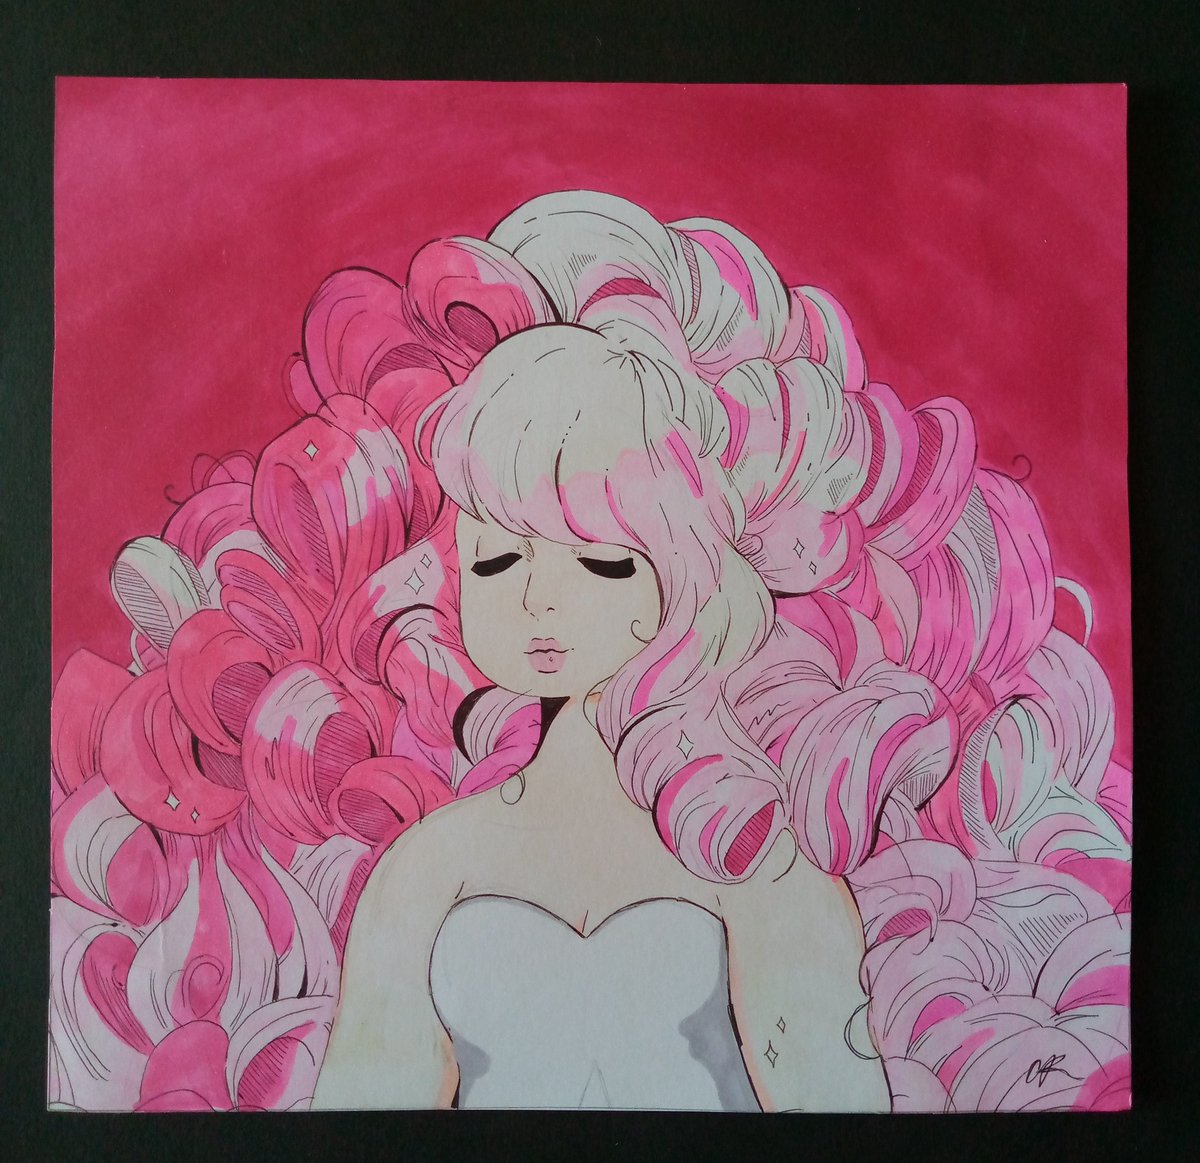 throwback to this #RoseQuartz draw i made in 2021 <3
#StevenUniverse #fanart